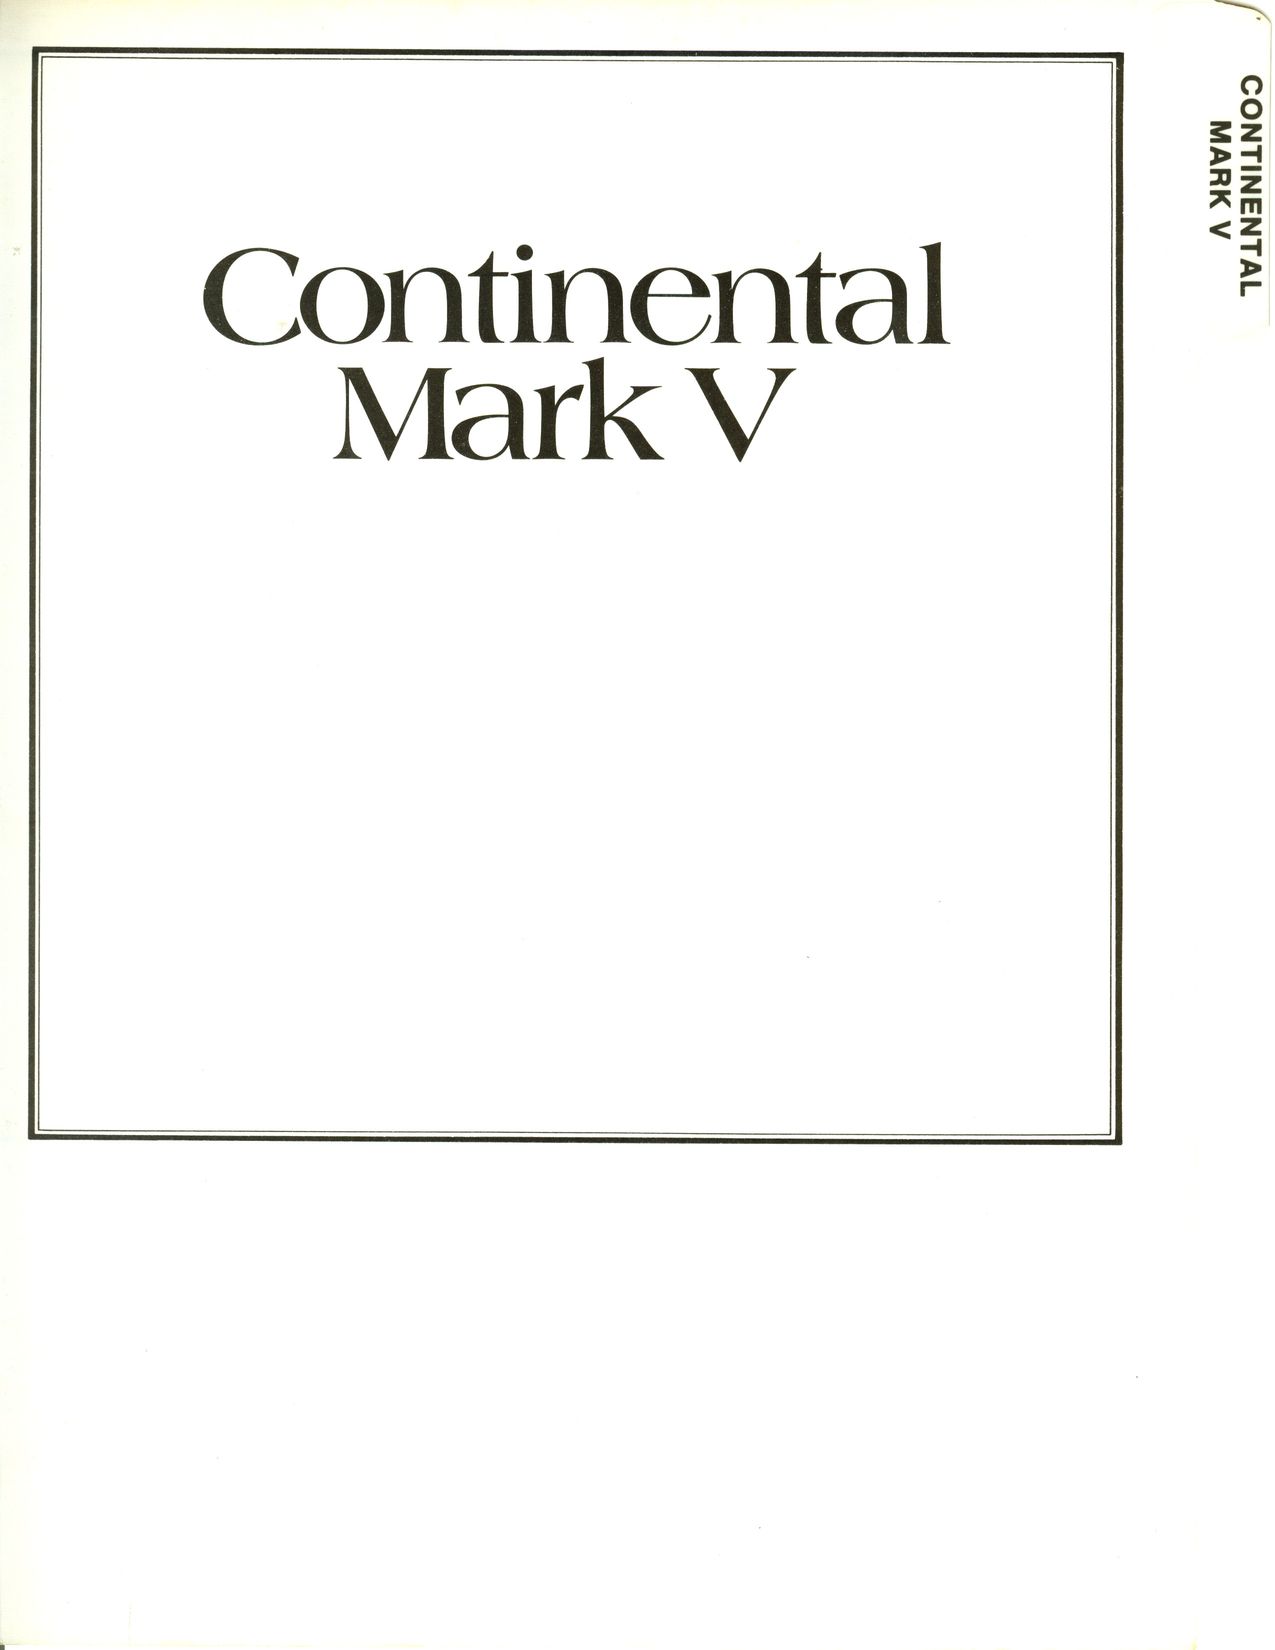 1977_Continental_Product_Facts_Book-1-00